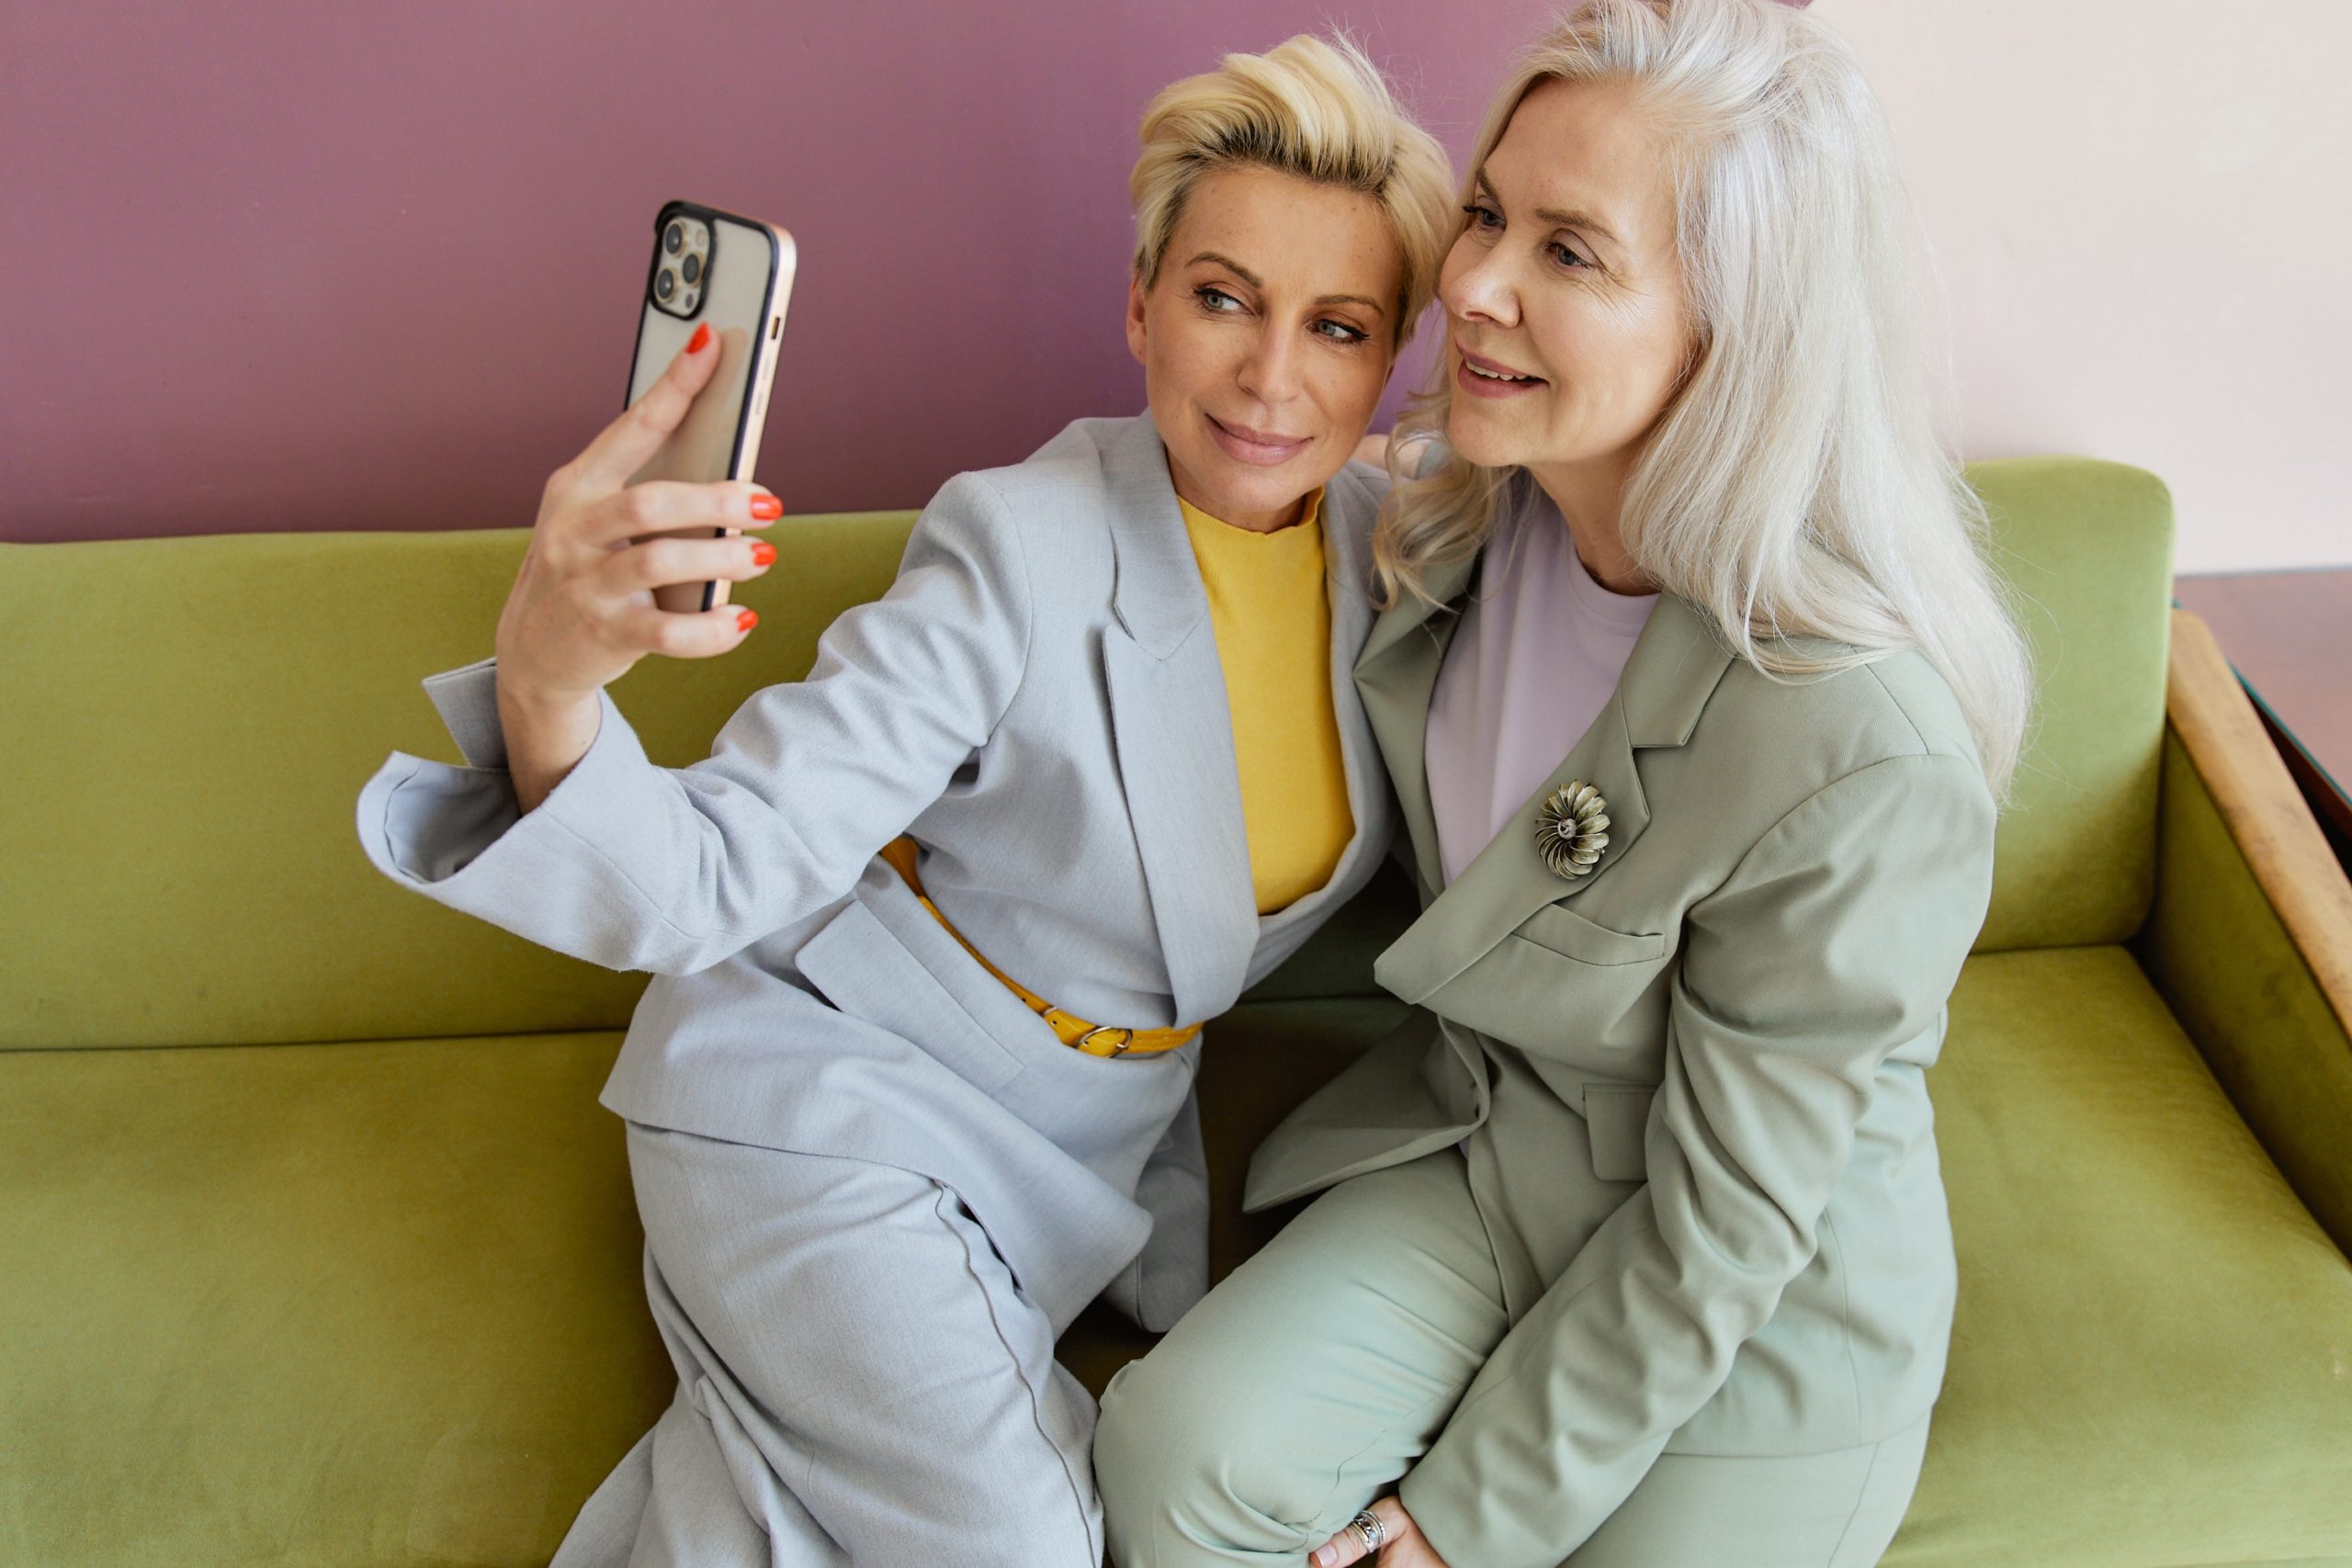 two mature attractive women take a selfie together